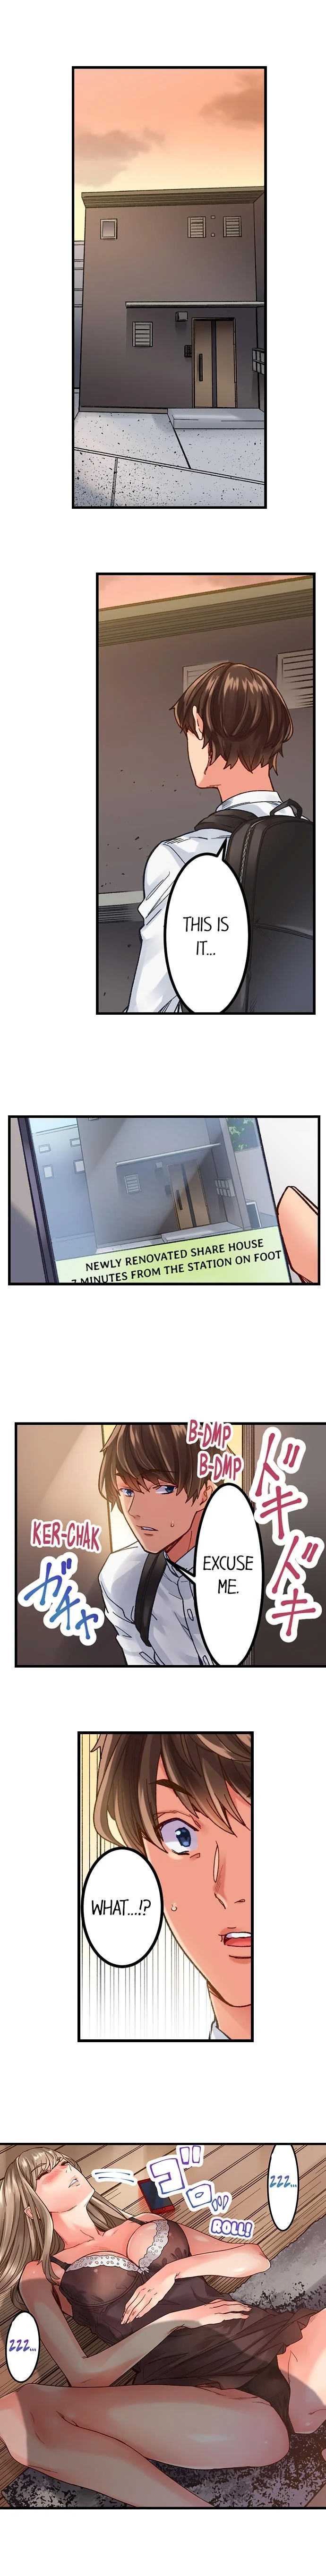 The Share House’s Secret Rule - Chapter 1 Page 2